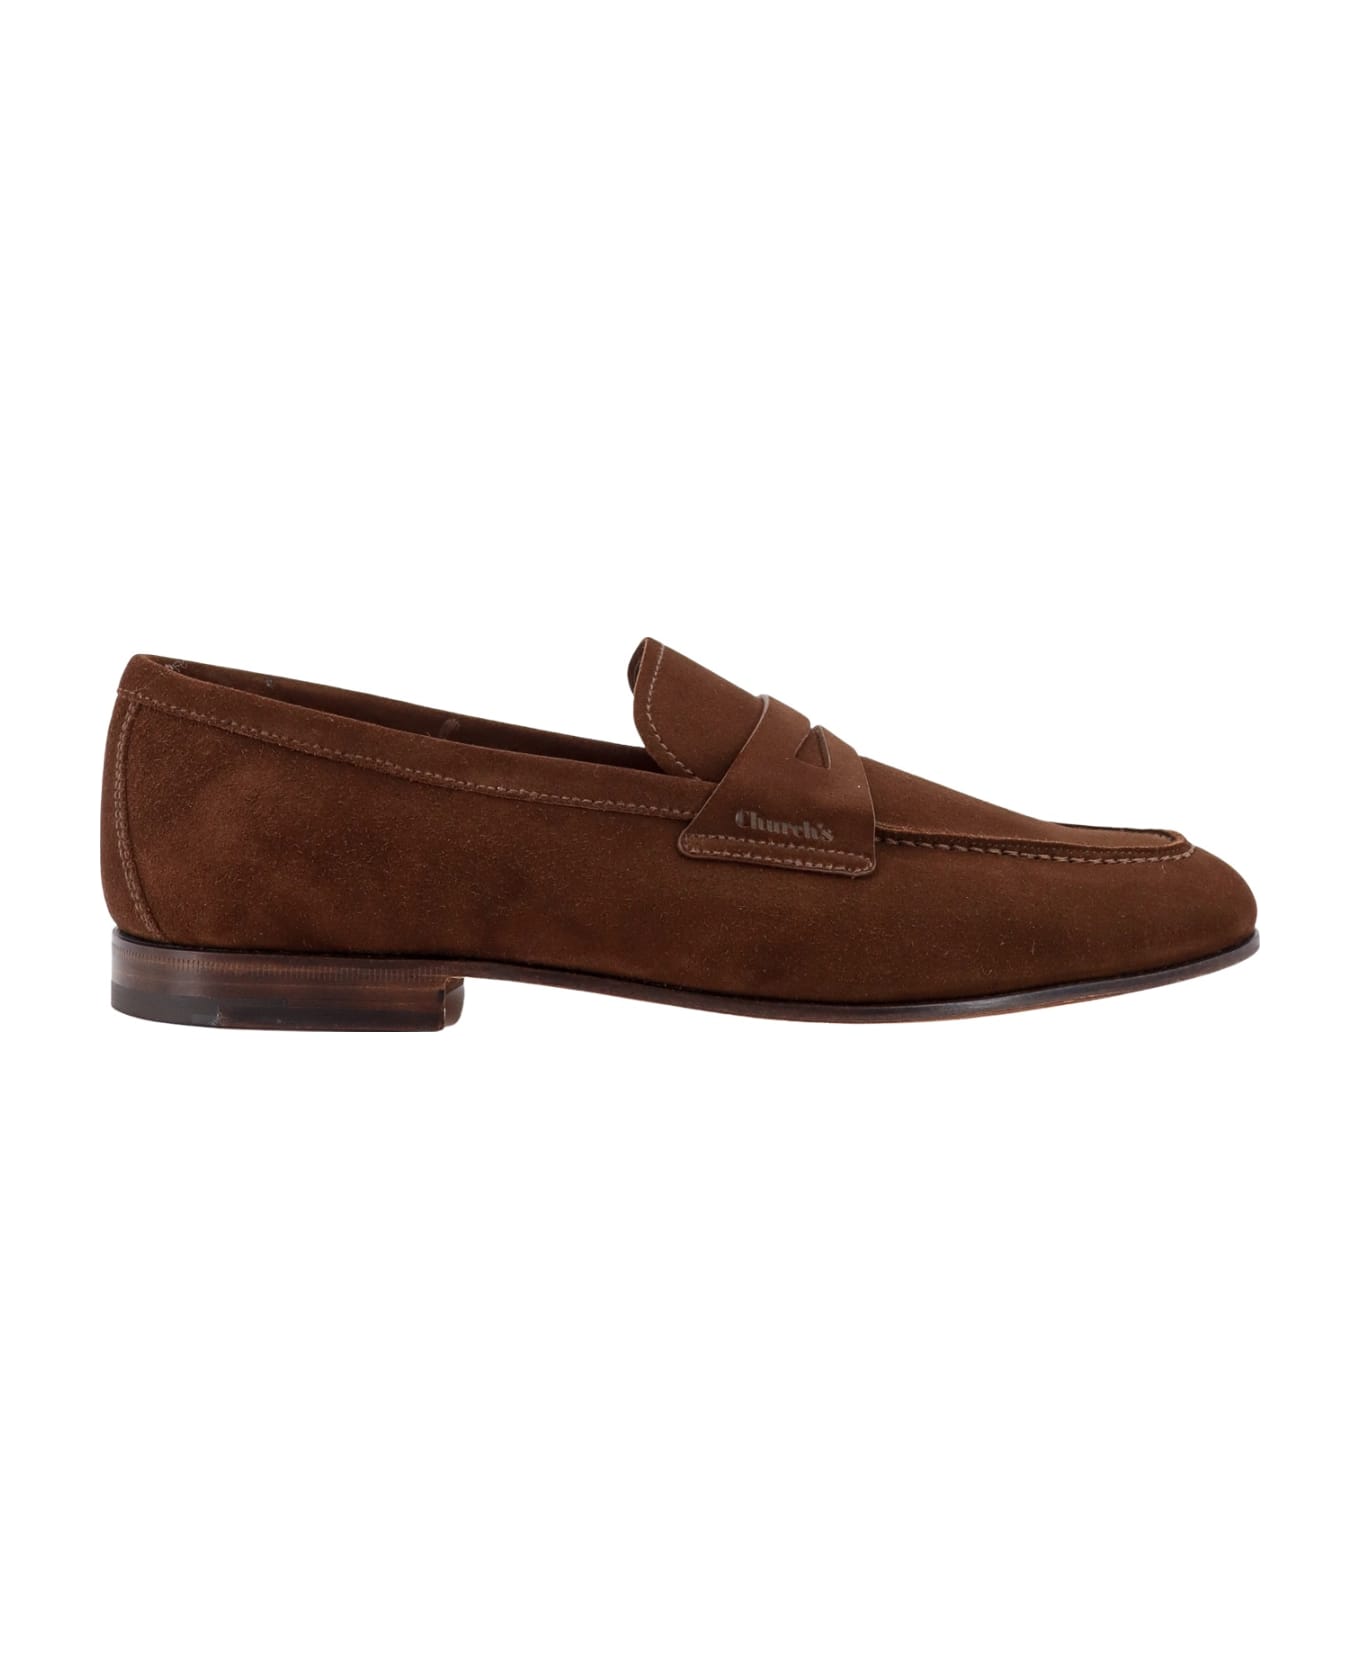 Church's Loafer - Brown